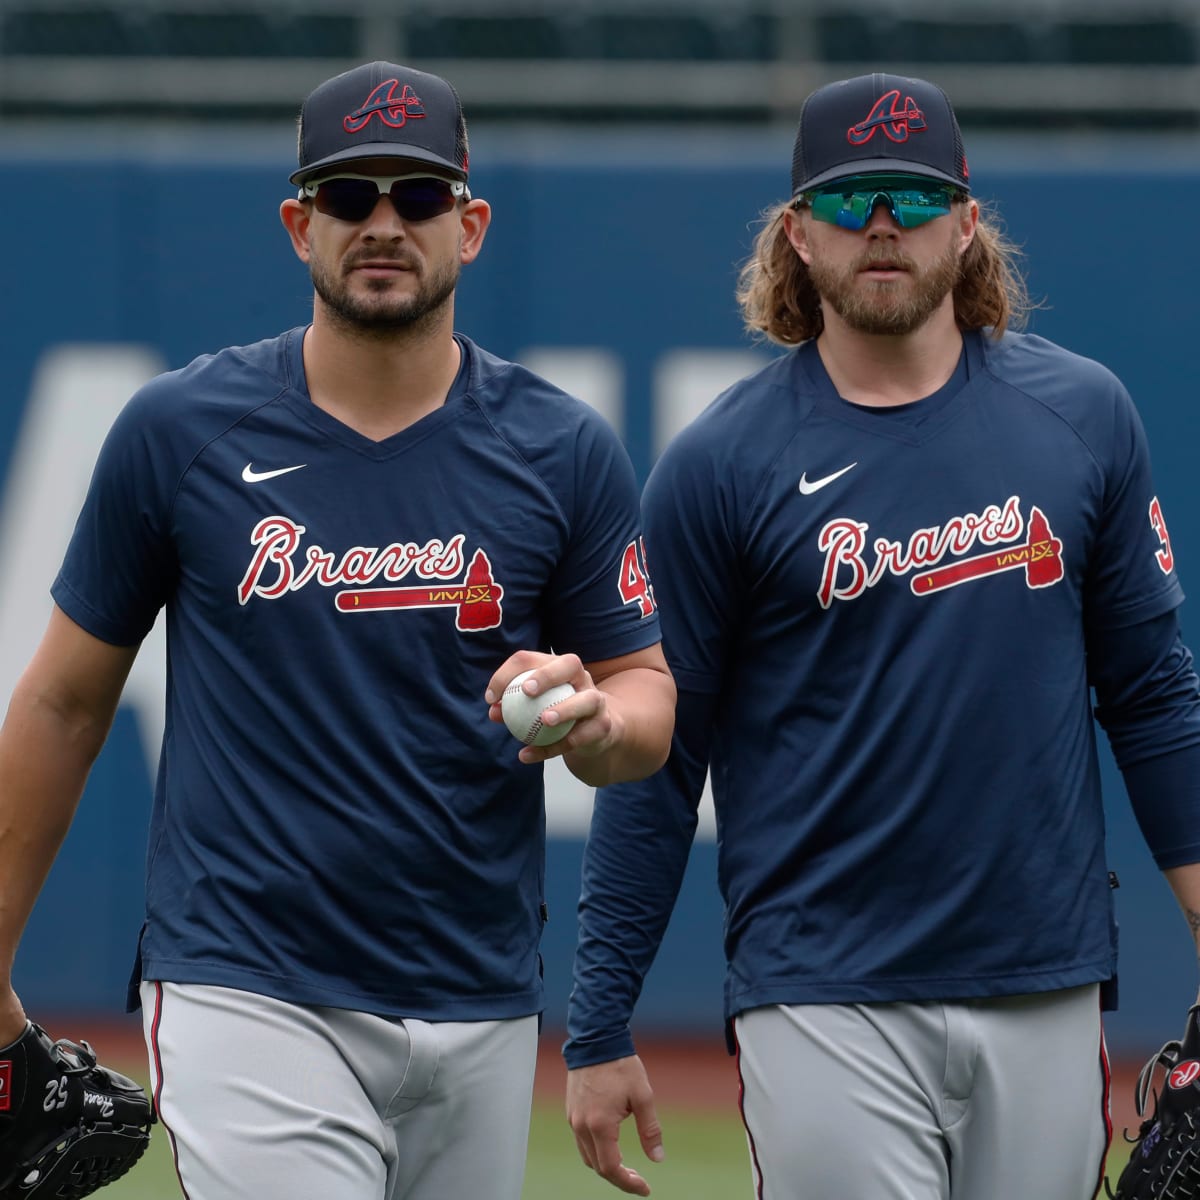 Braves offseason: Here are the important dates and deadlines